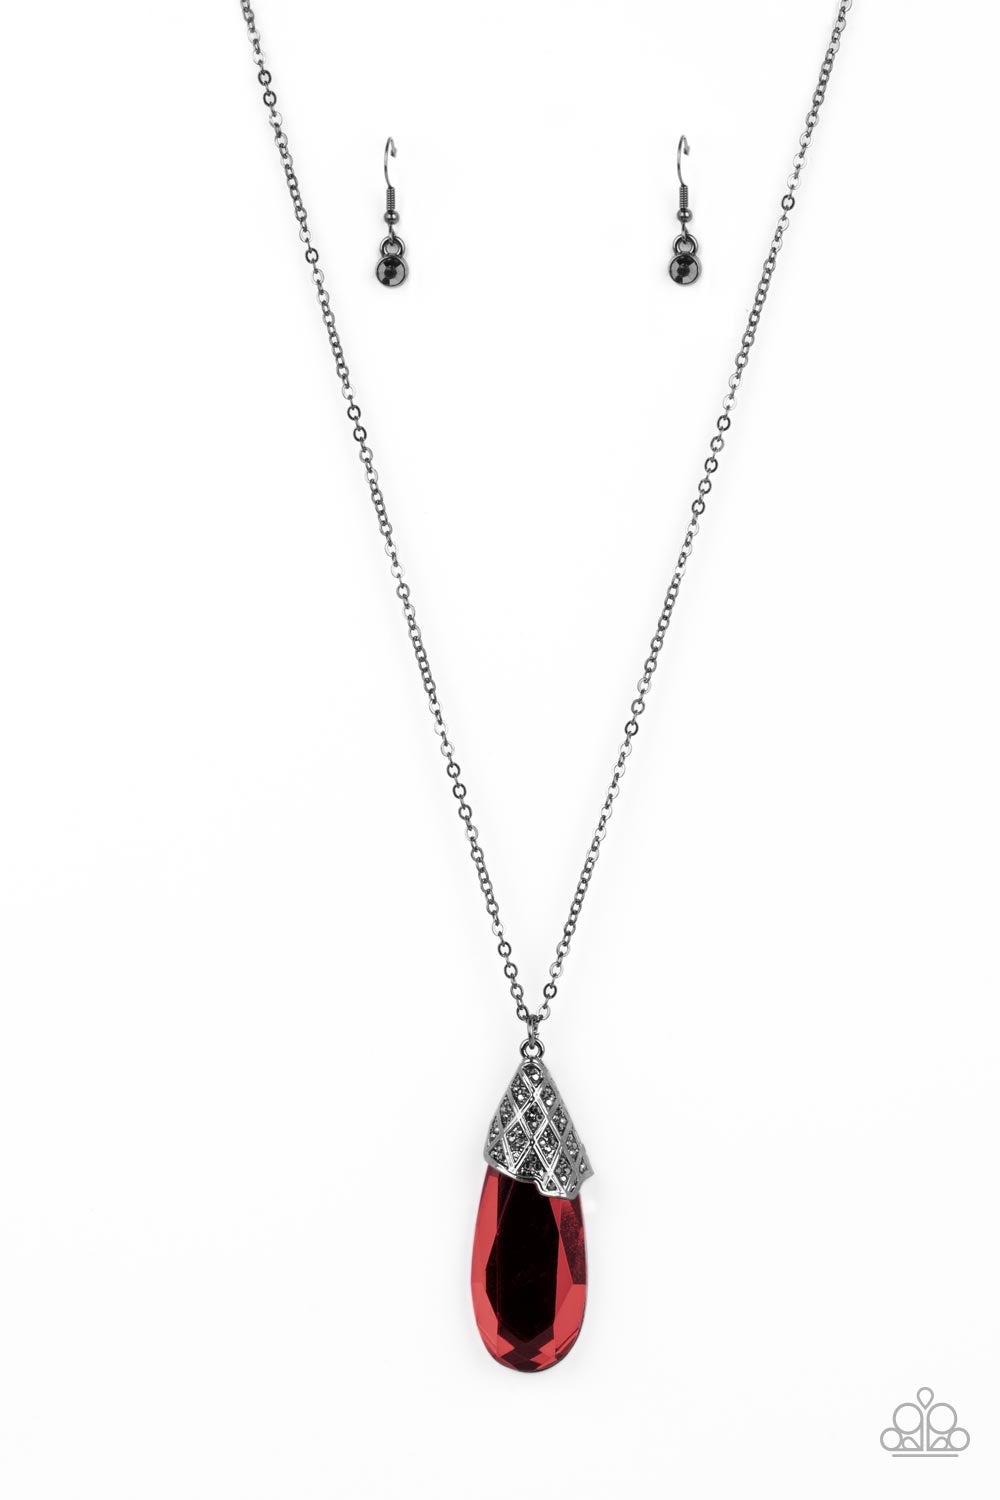 Paparazzi Dibs on the Dazzle - Red Necklace -Paparazzi Jewelry Images